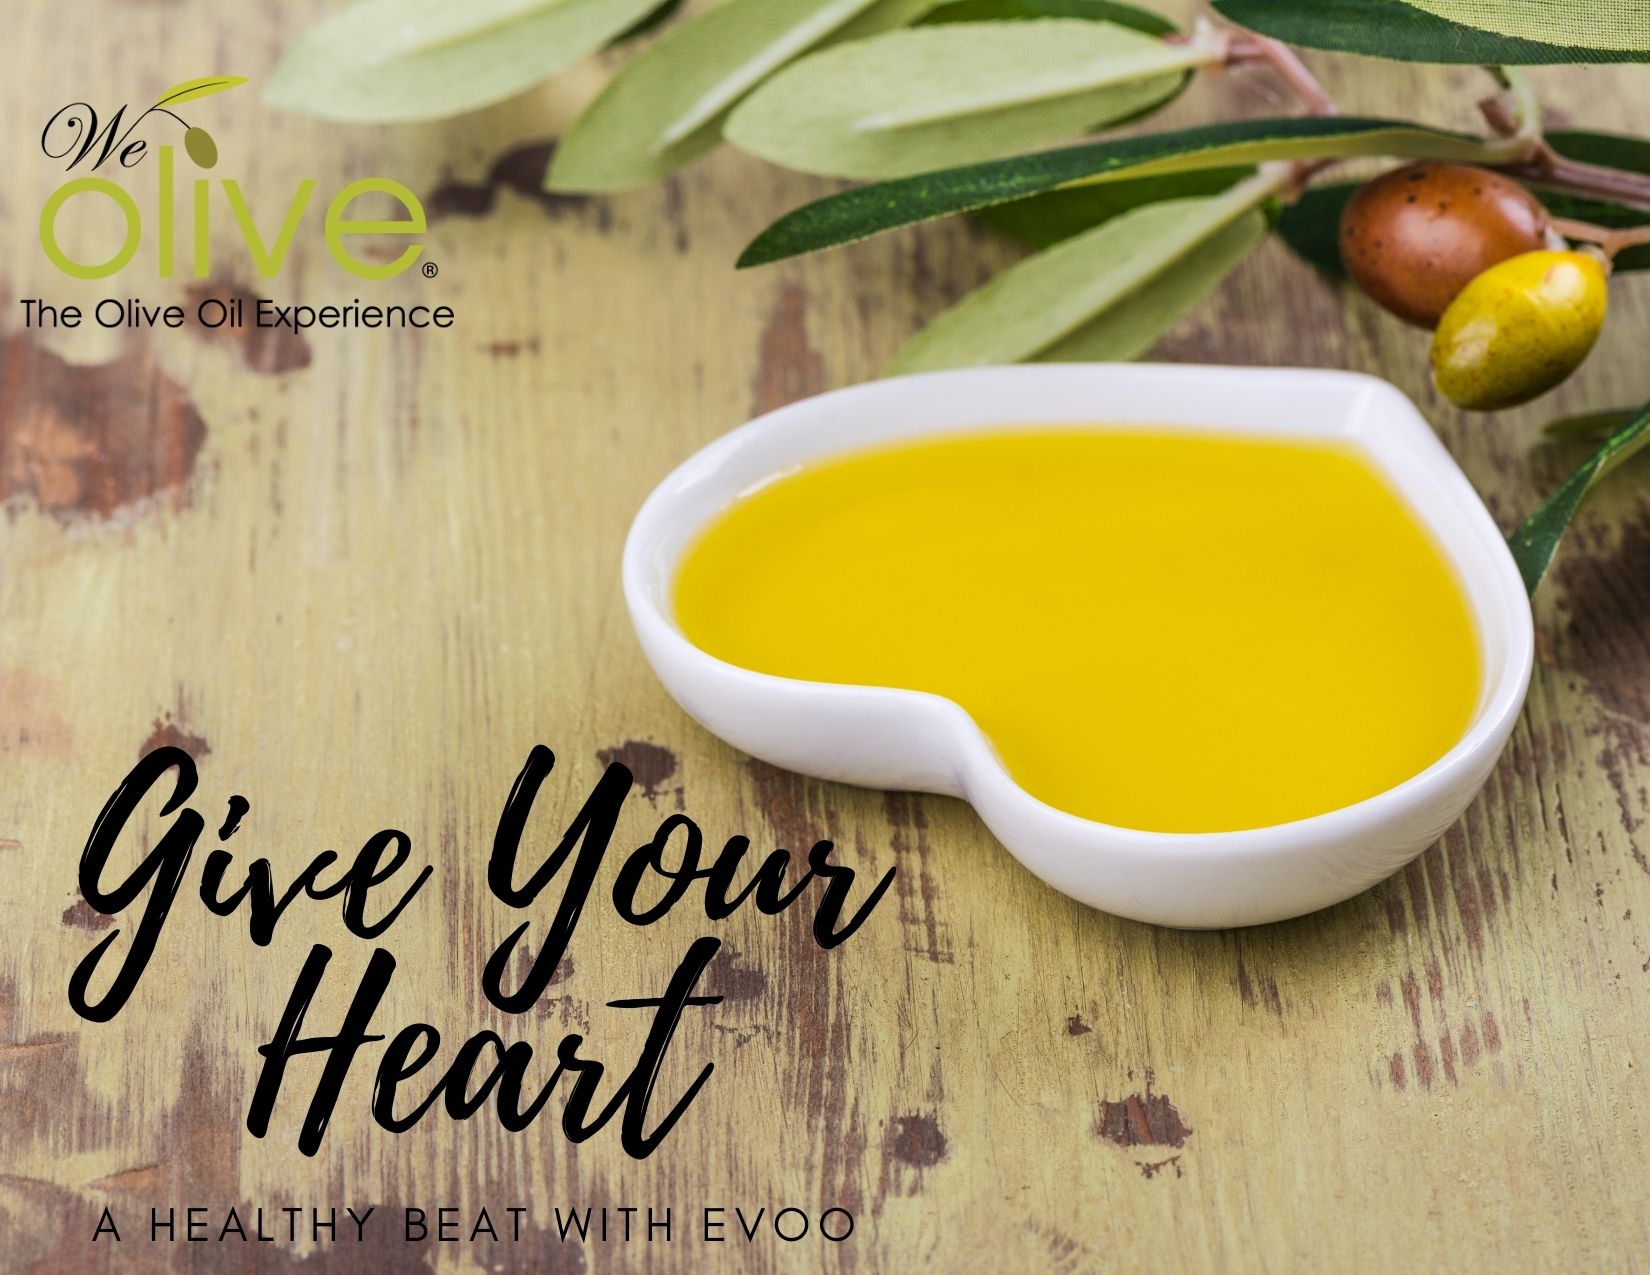 Heart Healthy thanks to EVOO